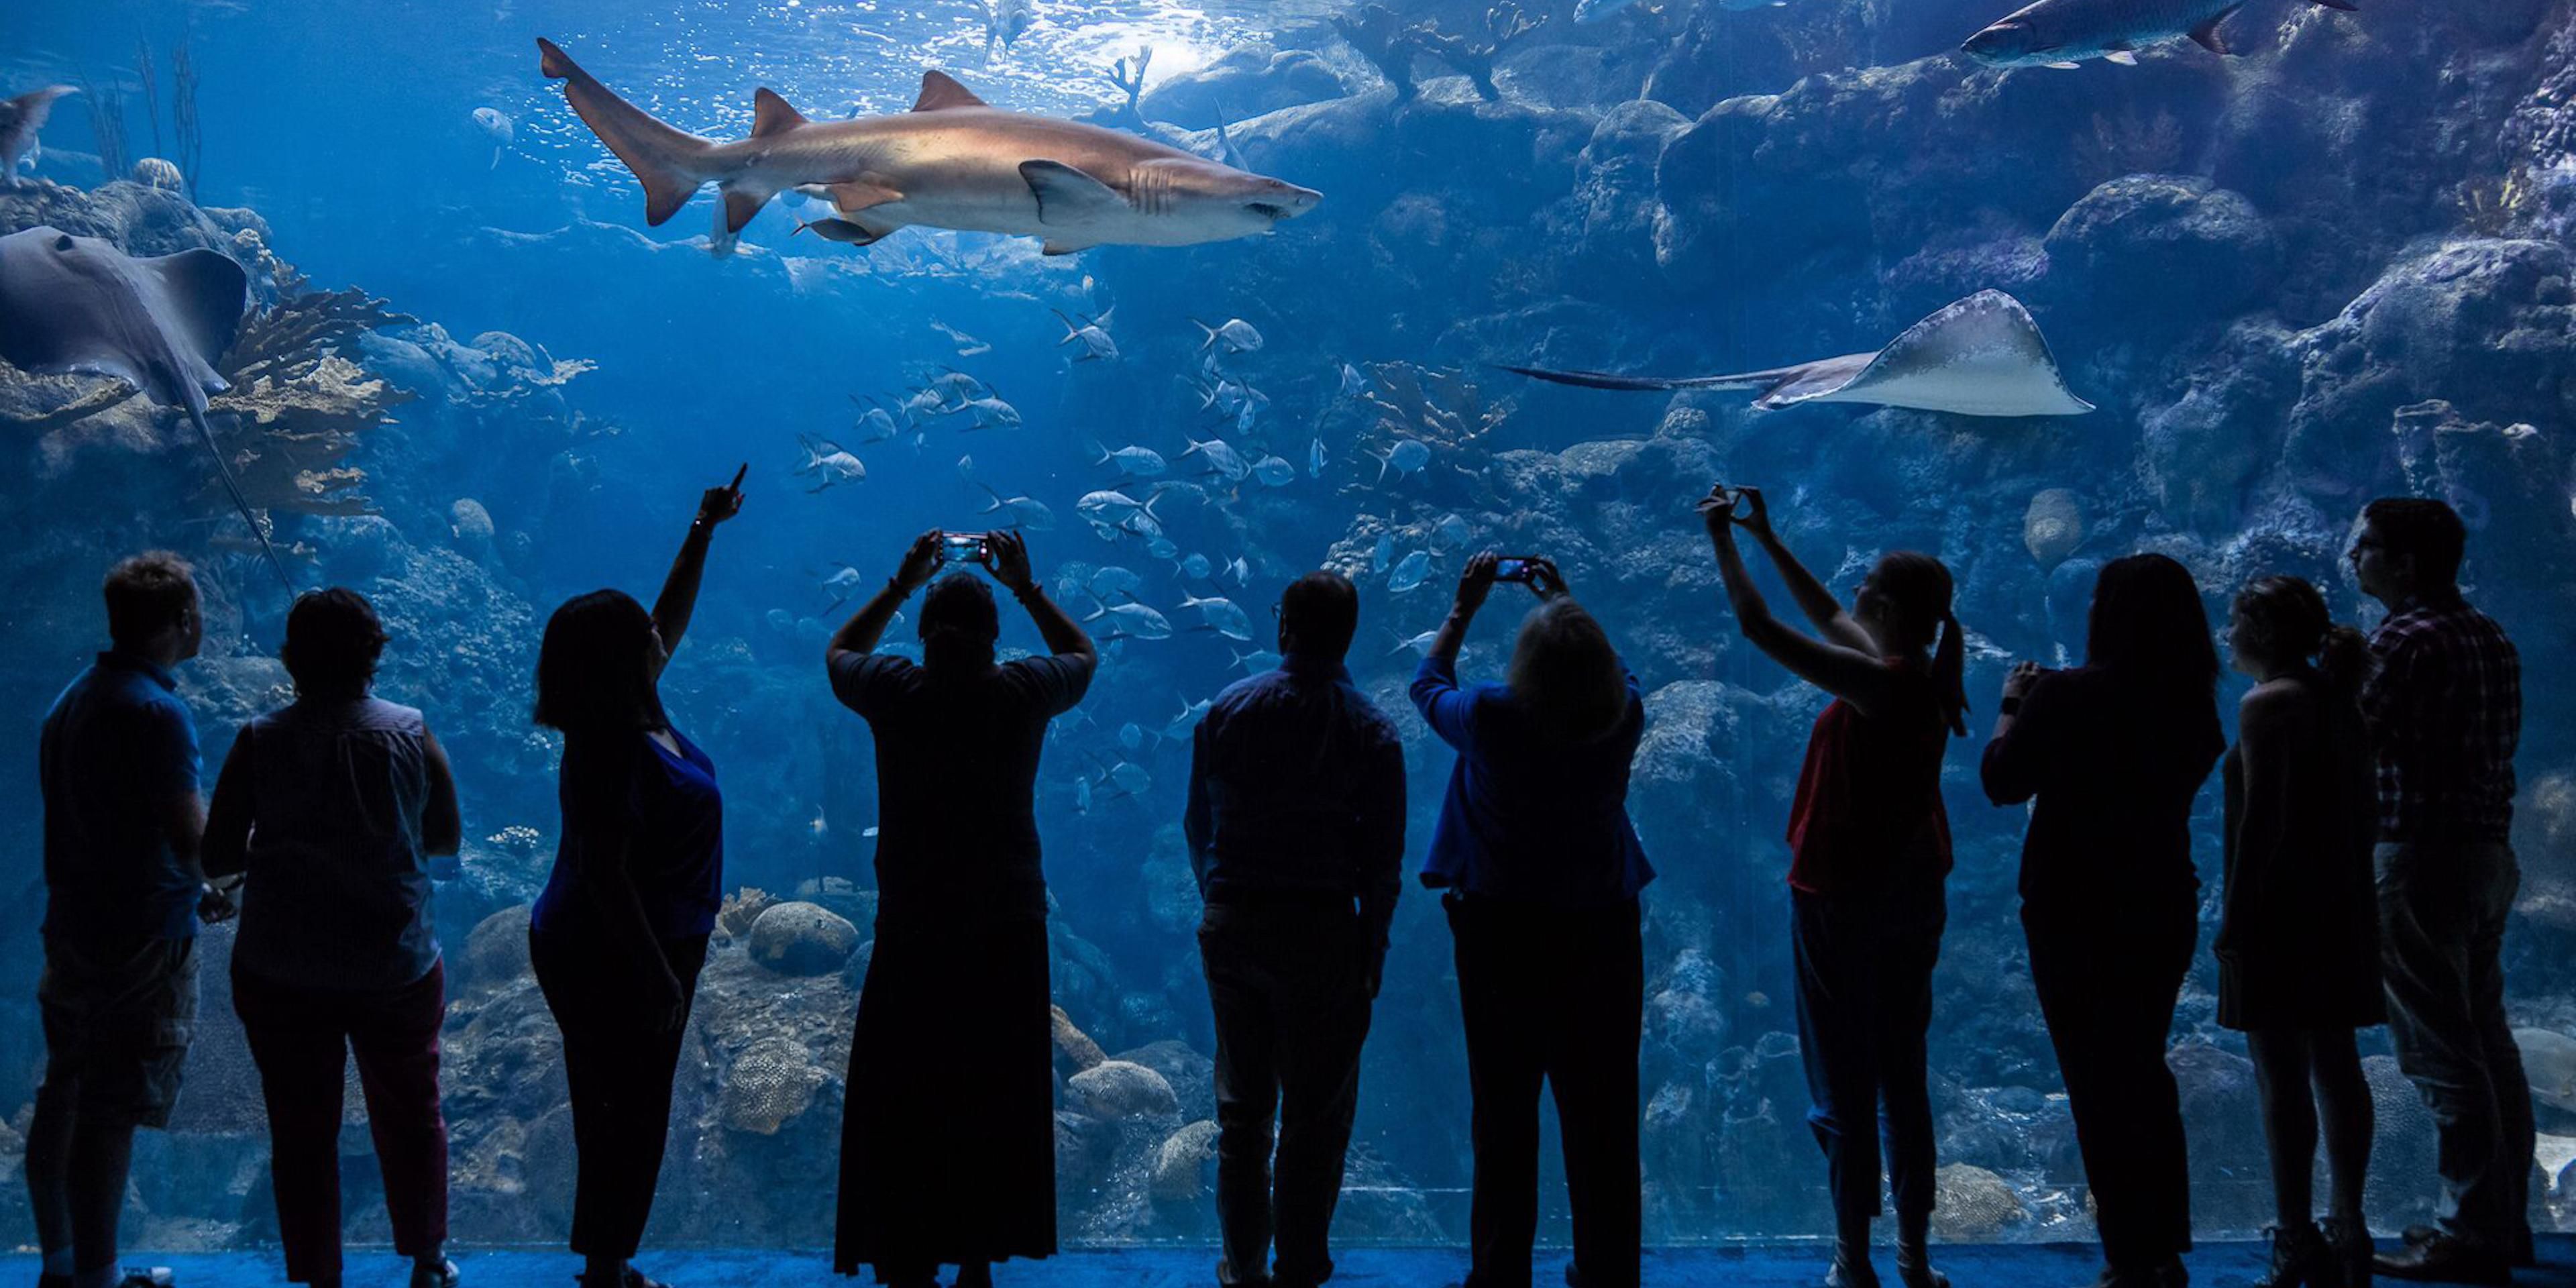 Fun is in the water at The Florida Aquarium, home to a variety of animals from dwarf seahorses to apex predators! Explore nine habitats of marine and land animals from Florida and beyond. Learn about alligators, river otters, sharks, rays, sea turtles, eels, barracudas, and more.